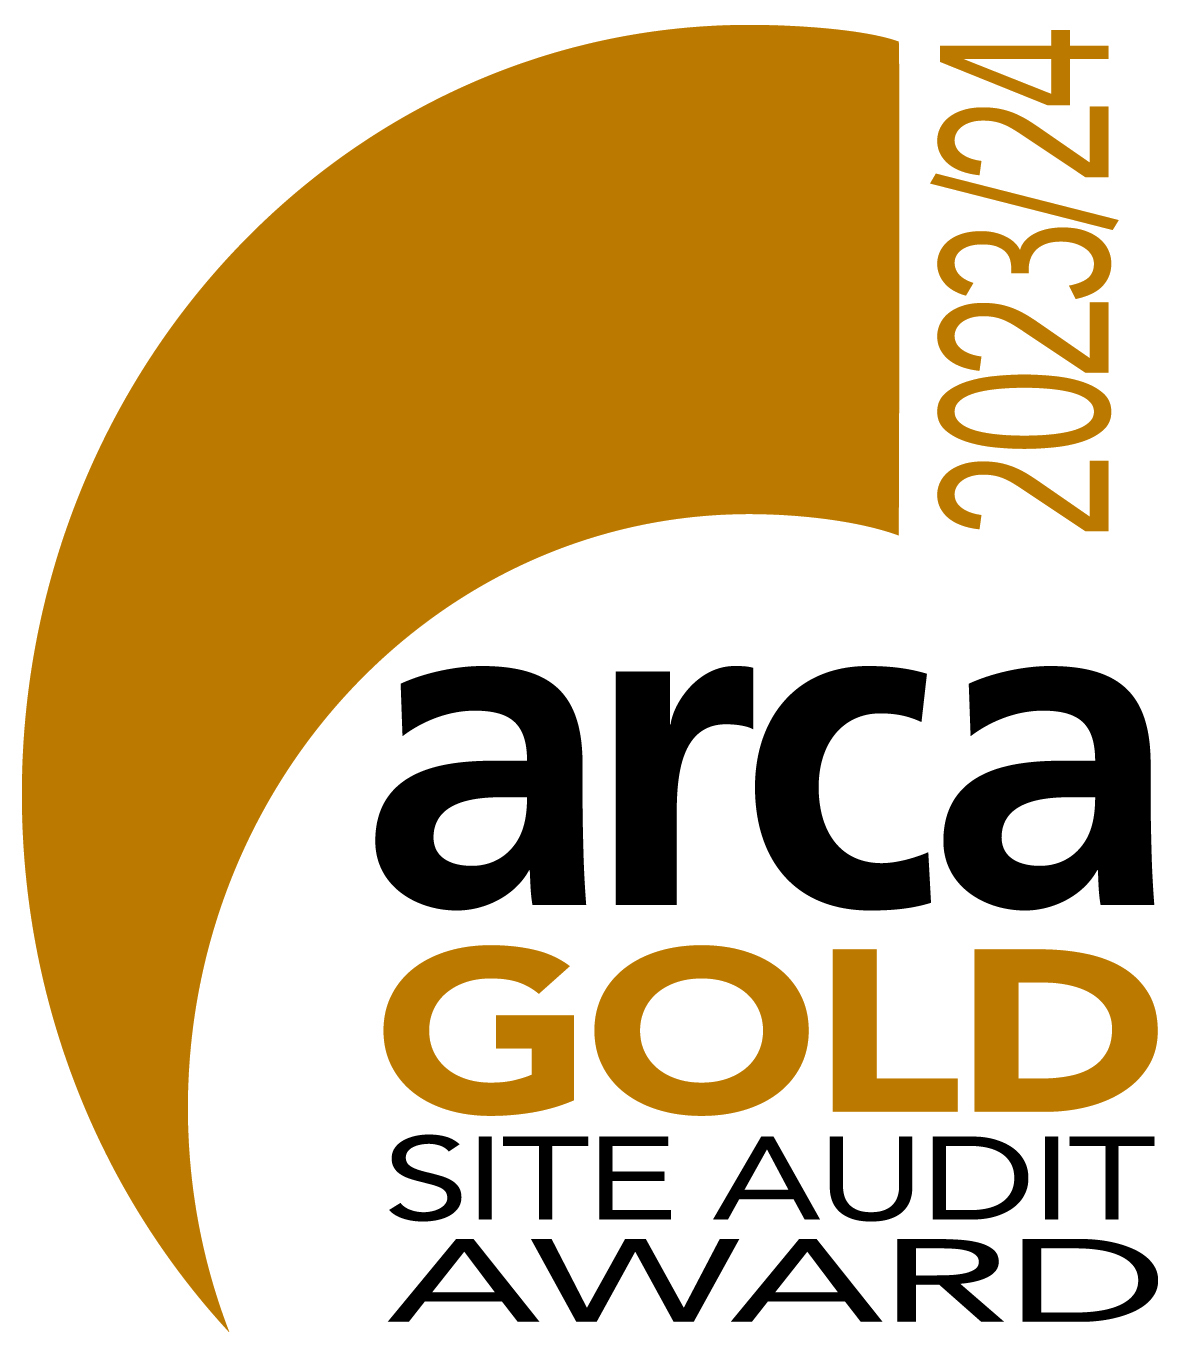 ARCA Gold Site Audit Award 2023/2024 awarded on 11th Oct 2023